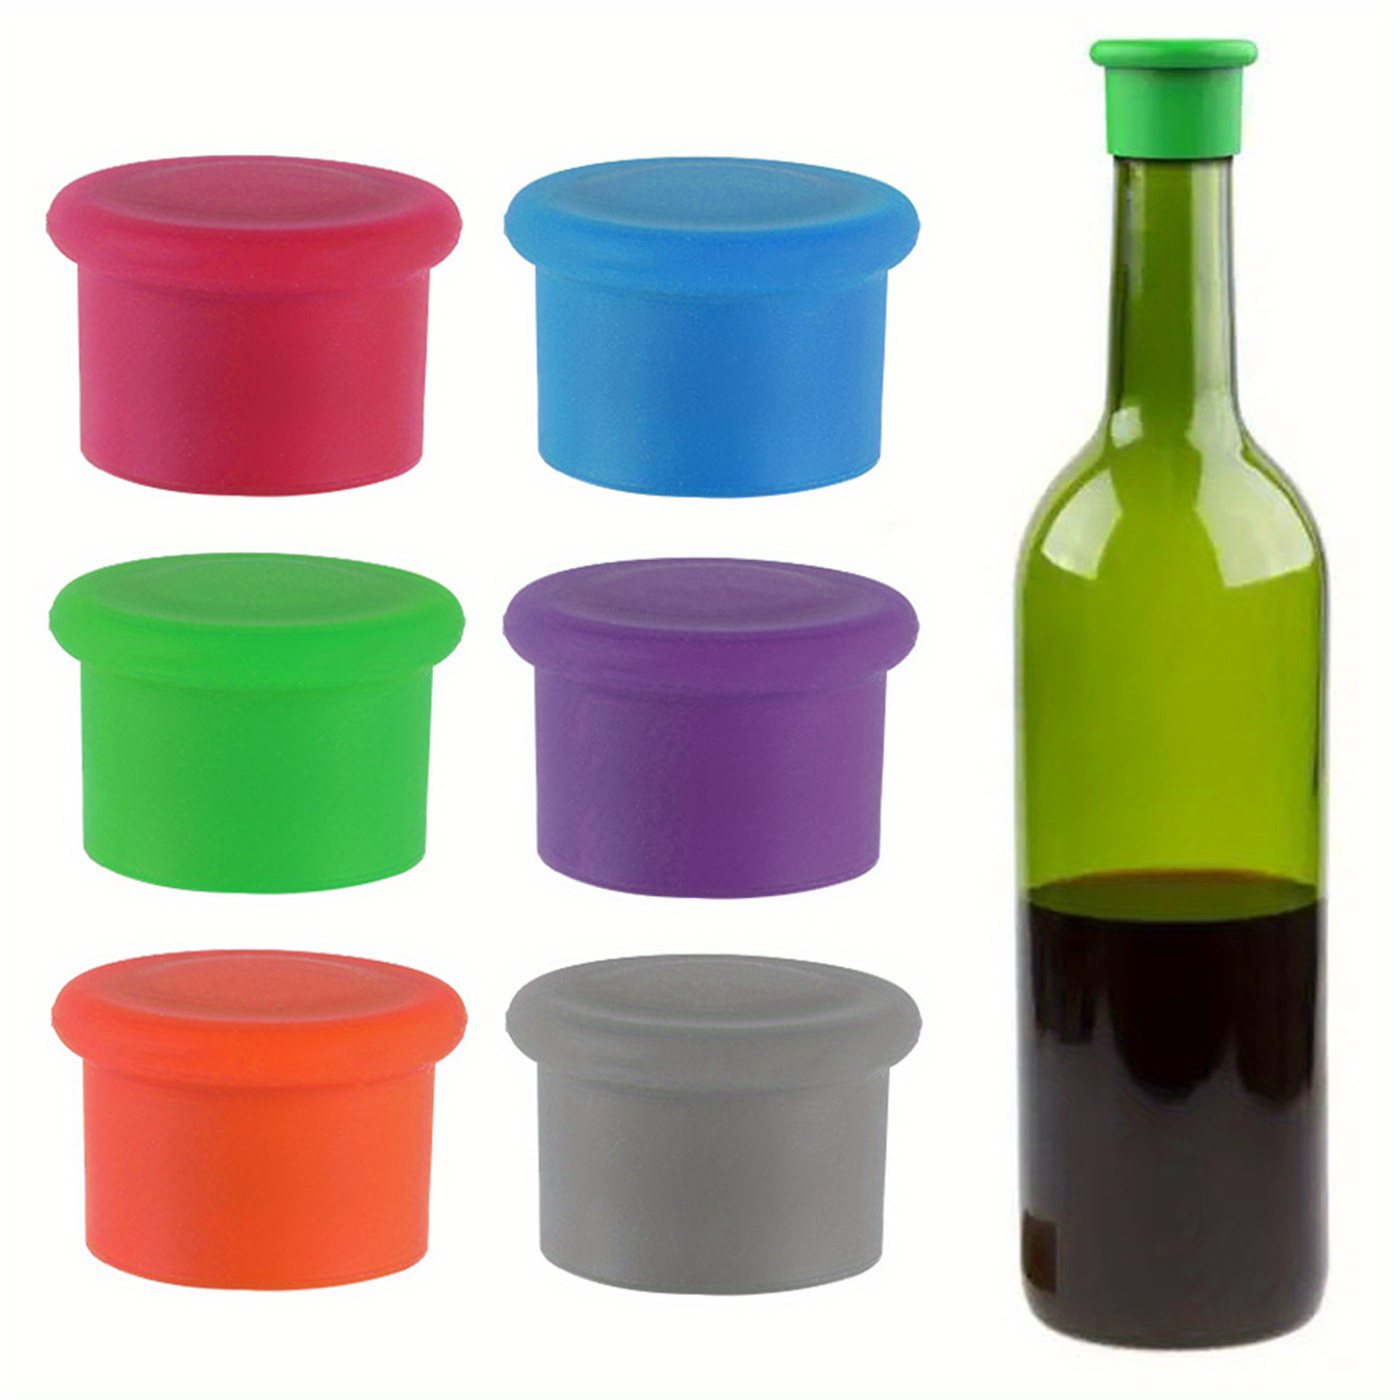  8 Pcs Silicone Wine Stopper Reusable Beer Bottle